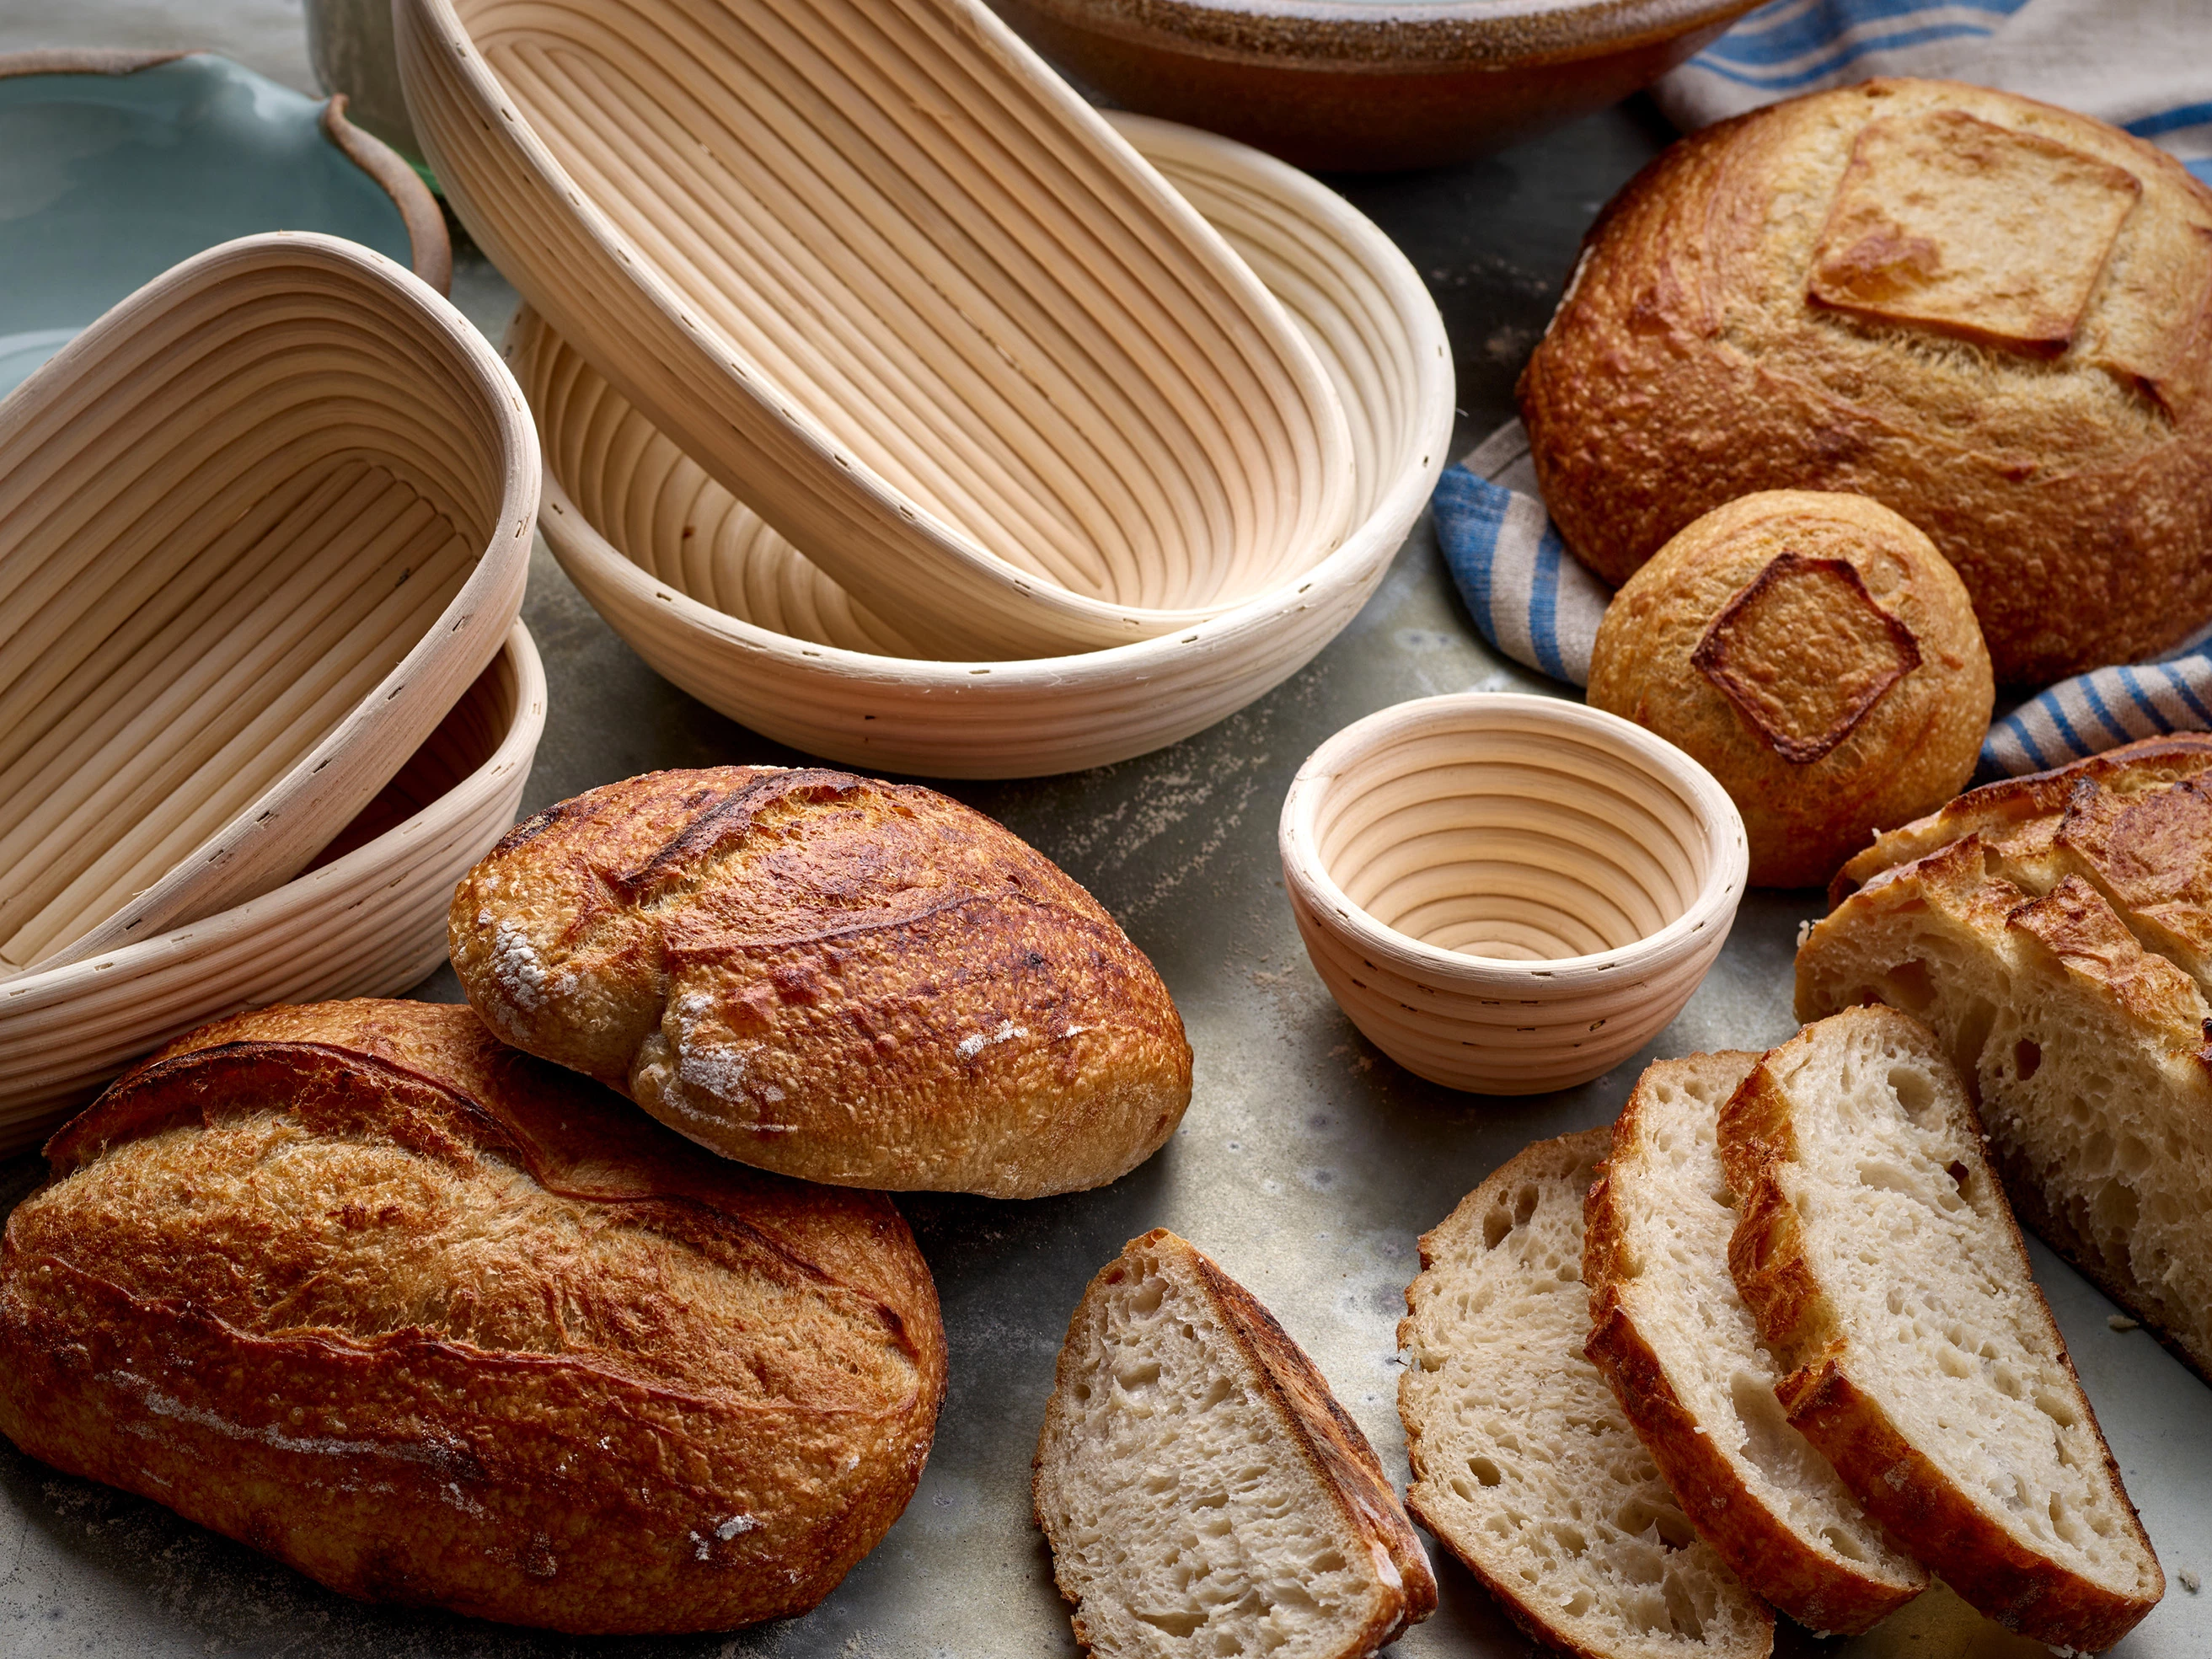 proofing baskets arranged with crusty loaves